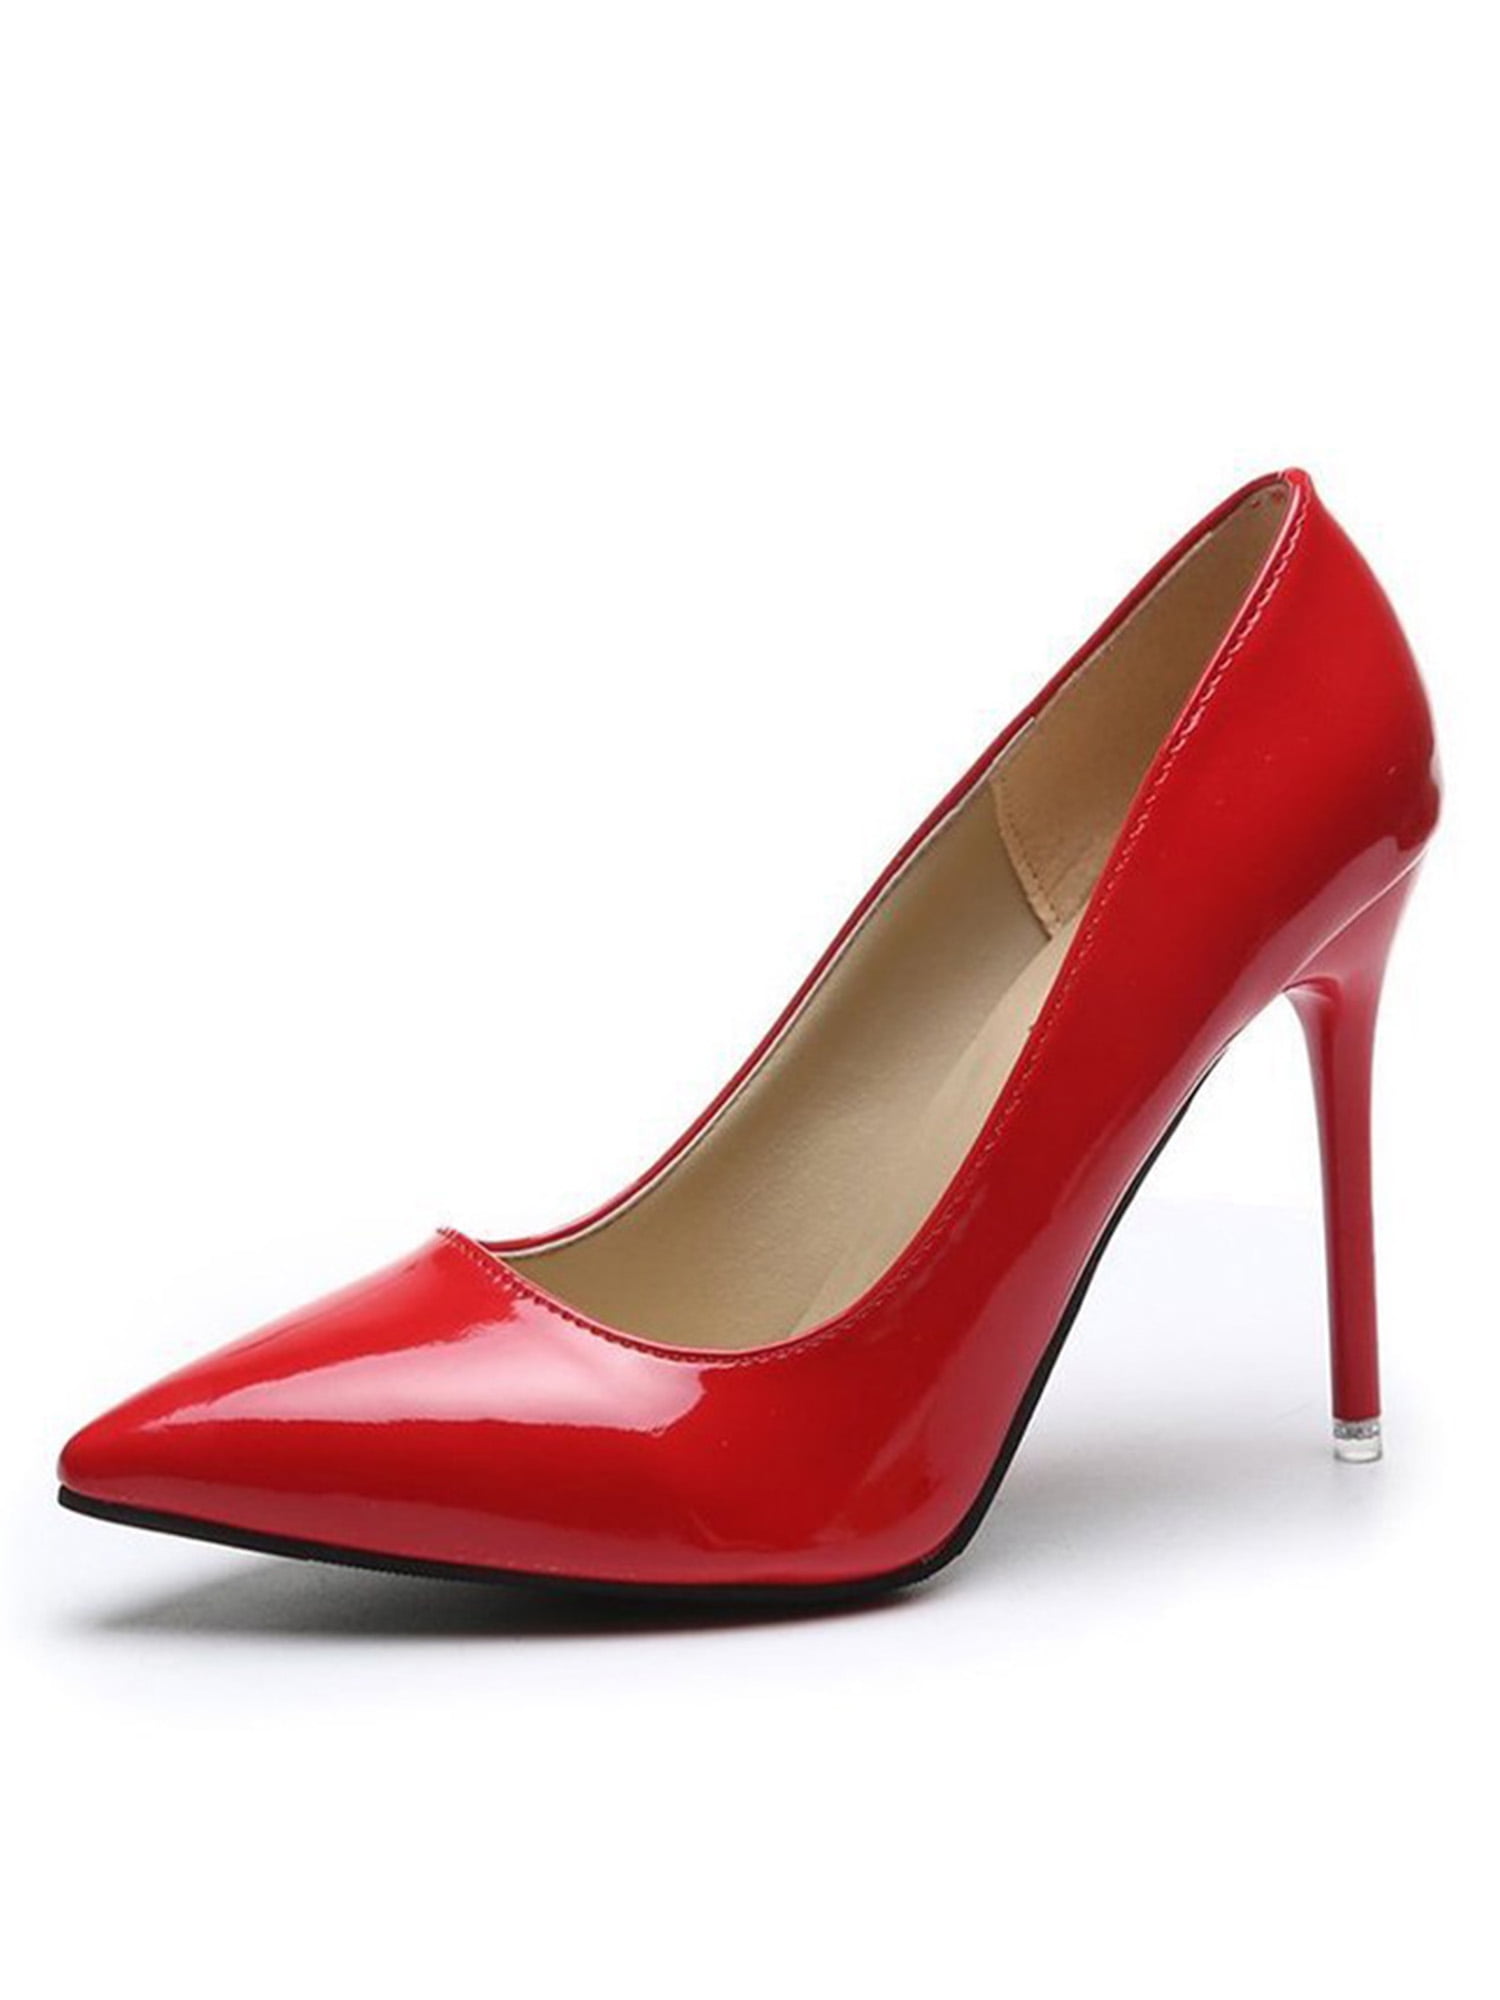 The Secret Science Behind Red Bottom Shoes - Brianne Fleming